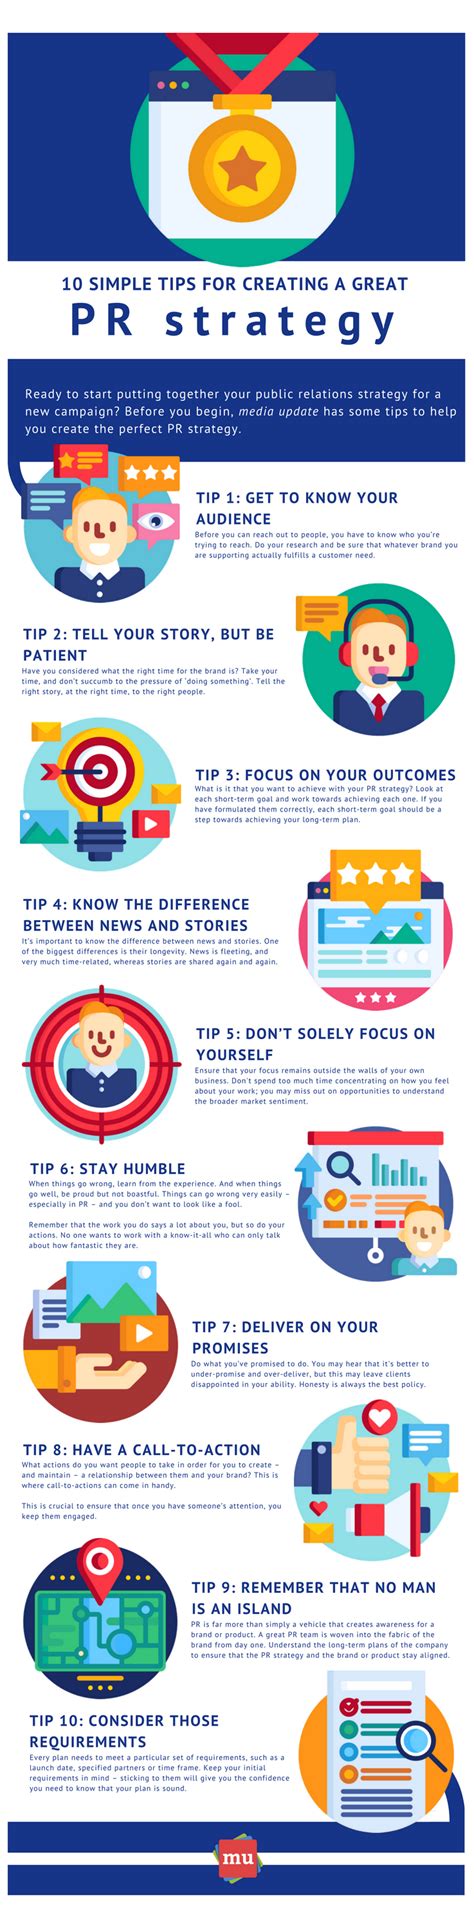 For instance, apple events, leaks of new product features, press releases, and exclusive interviews are carefully executed to maximize positive publicity. Infographic: 10 Simple tips for creating a great PR strategy